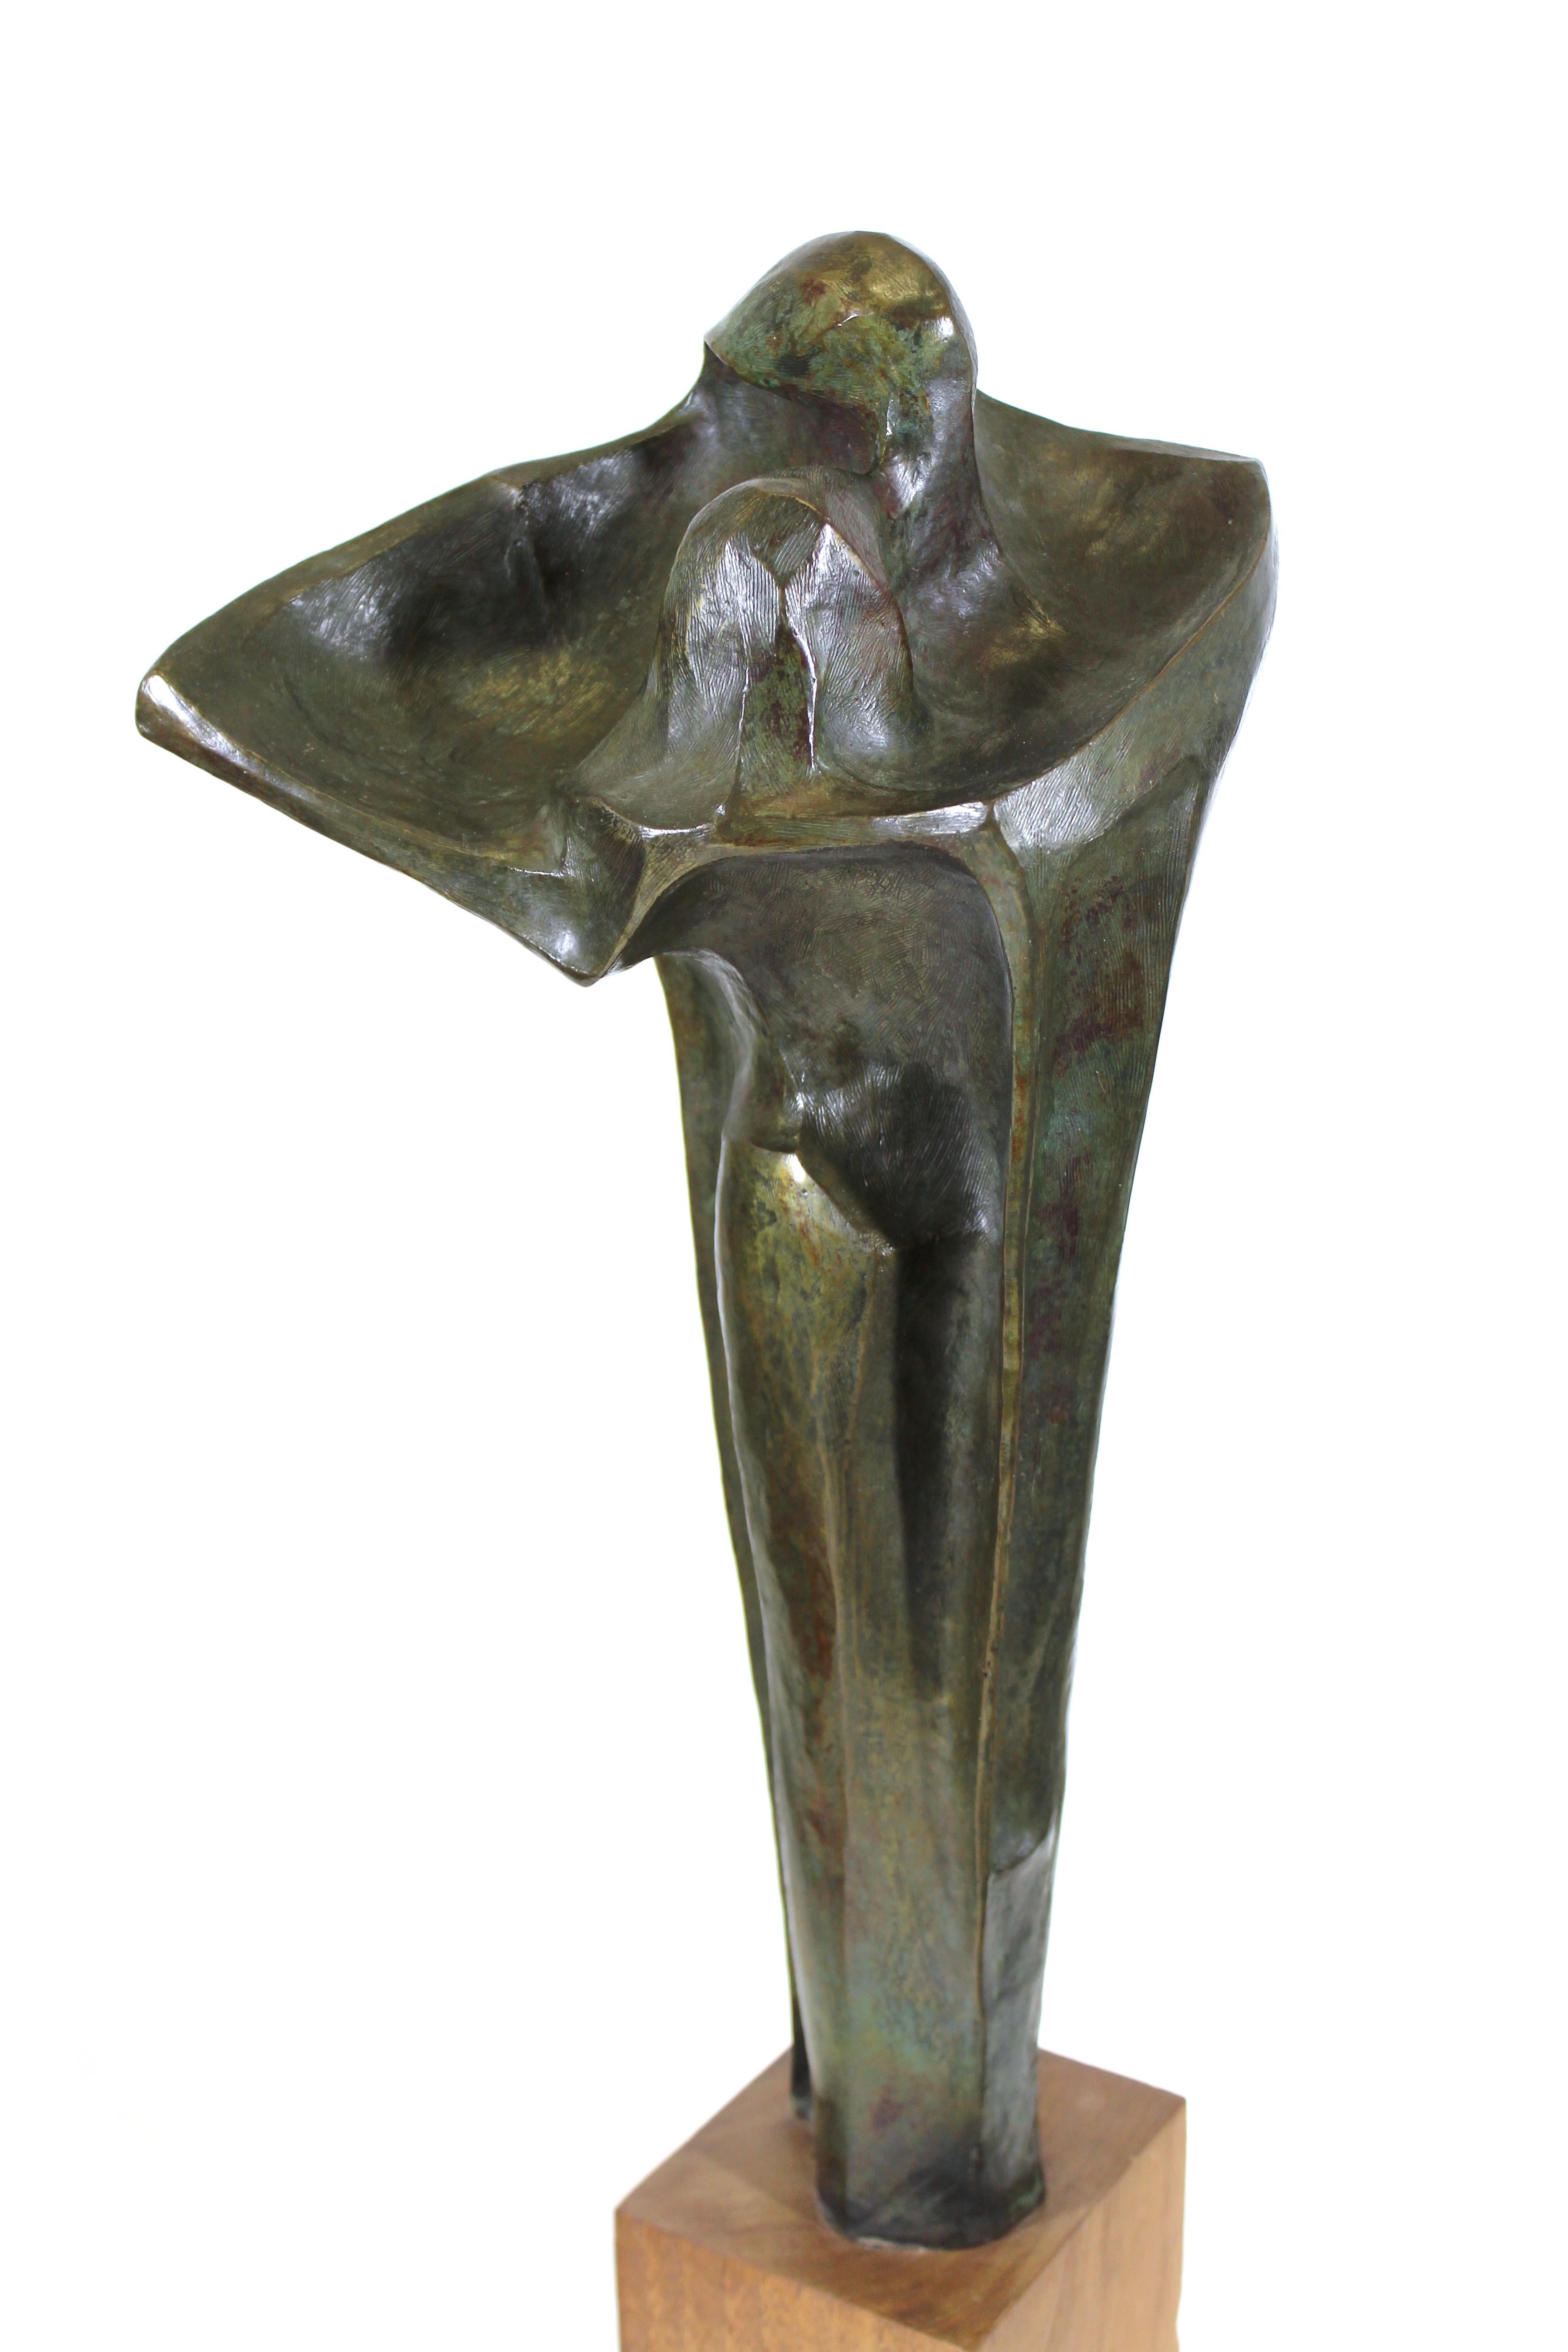 Joan Carl 'Cloaked Lovers' modern abstract cast bronze sculpture depicting a couple in embrace, signed and numbered '2/10' and dated '72' on the base.